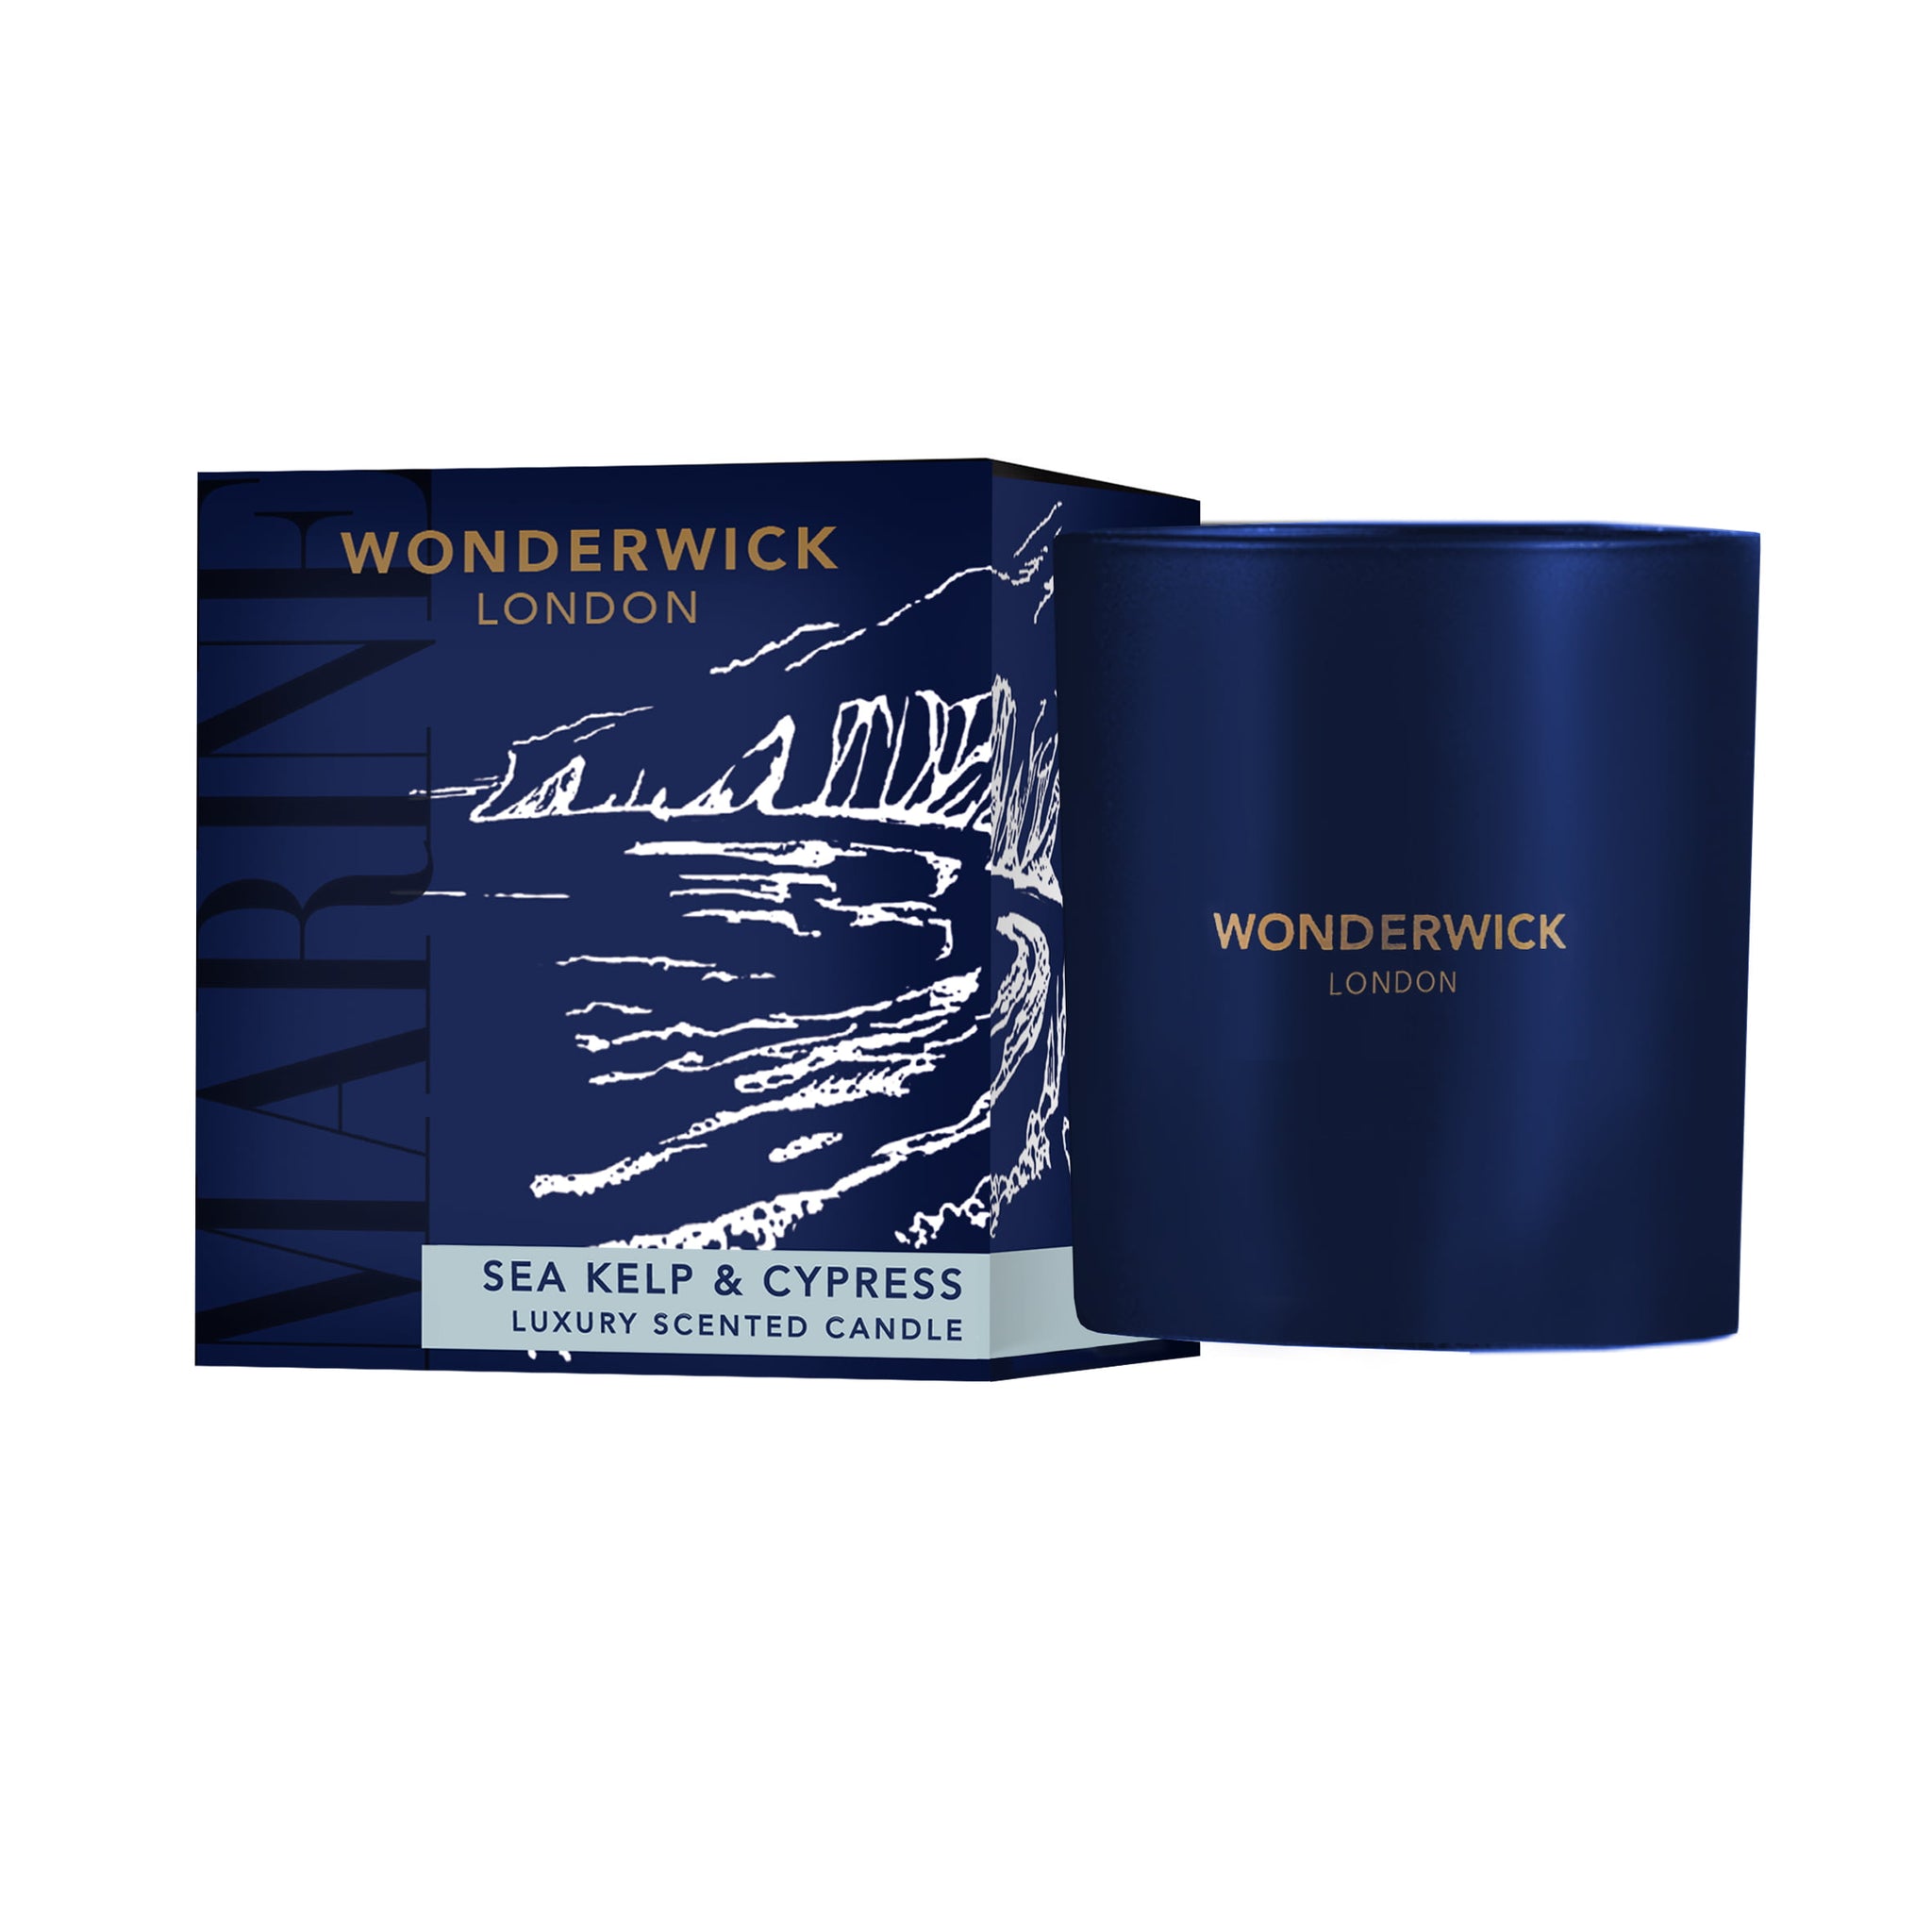 The Country Candle Company Wonderwick Candle in Sea Kelp & Cypress